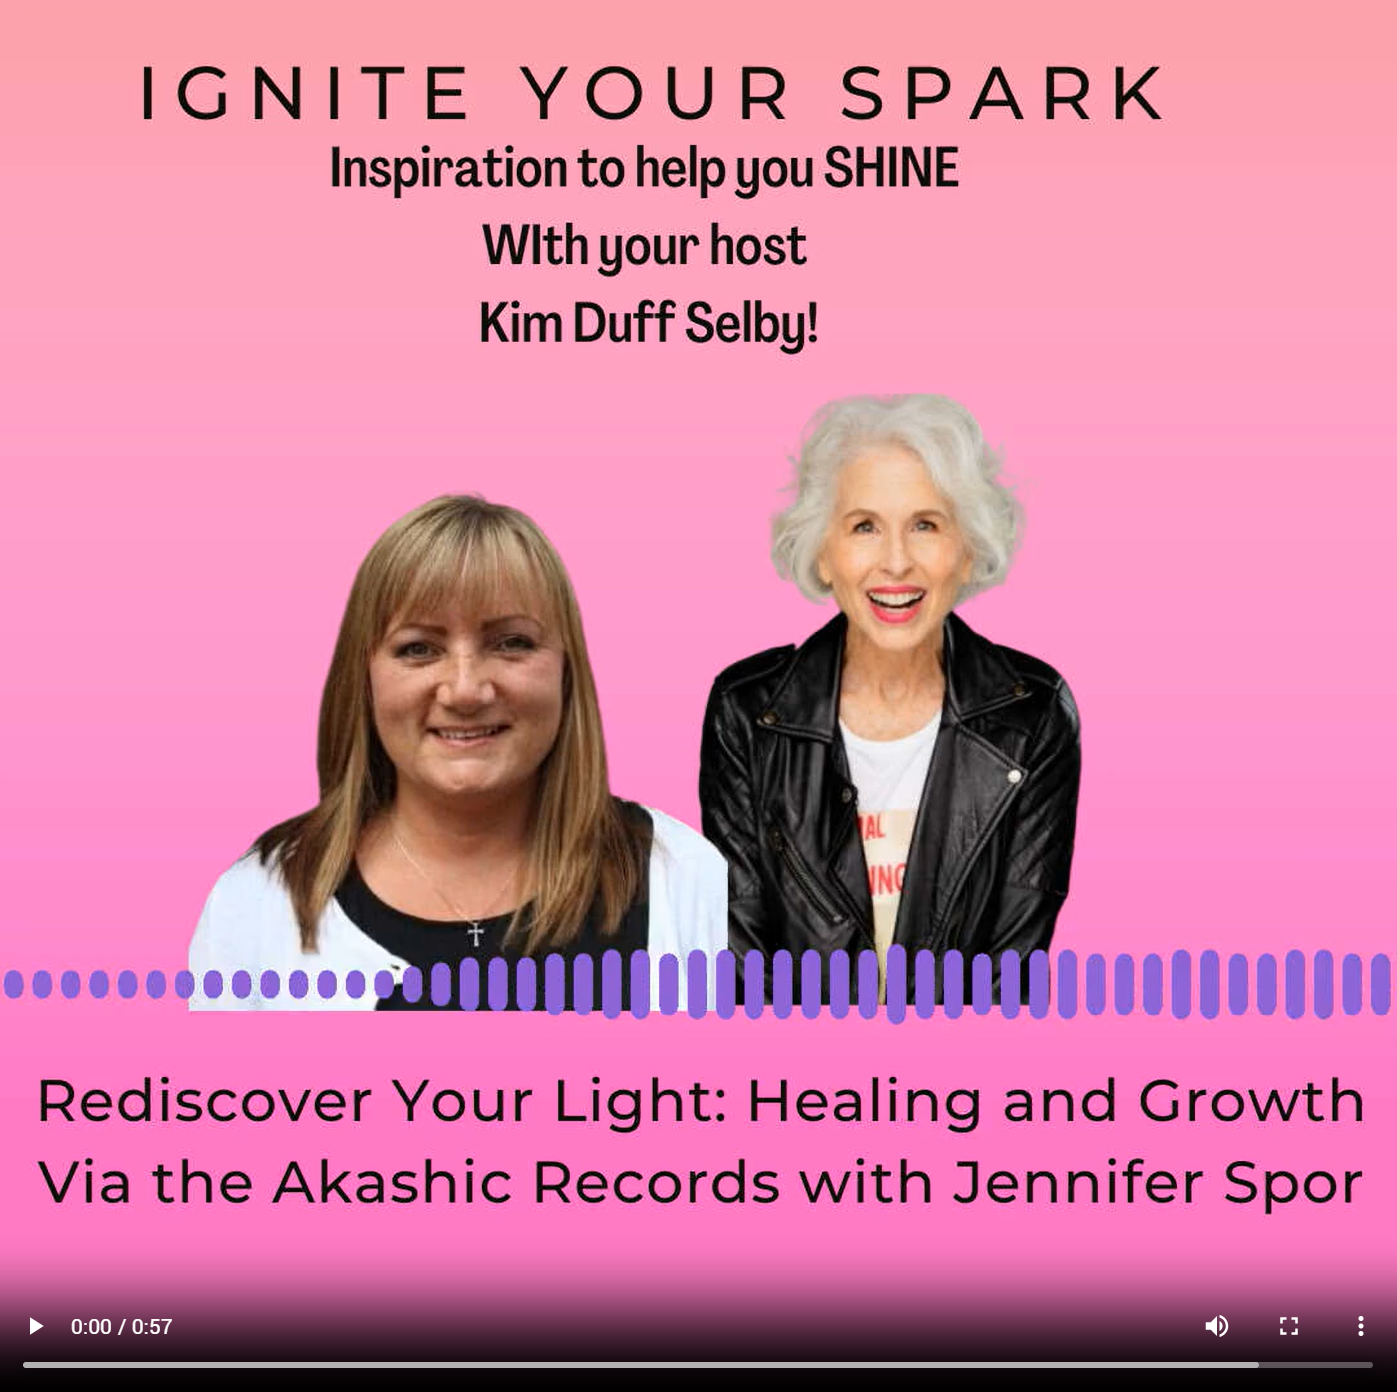 Accessing the Akashic Records with Jennifer Spor